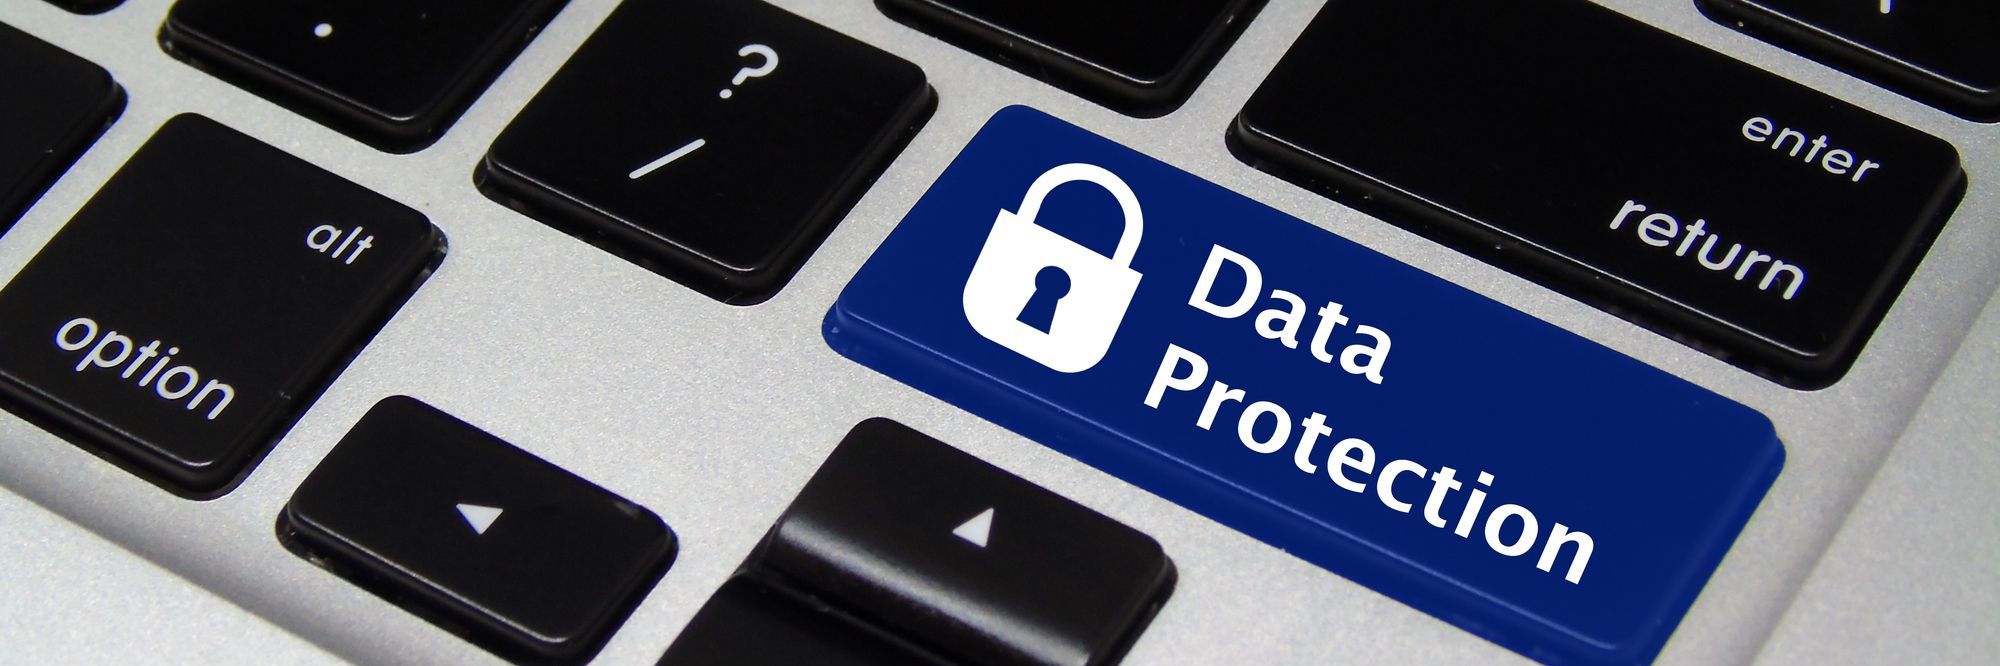 Data Protection & the UK GDPR - Compliance for DPOs & COLPs 